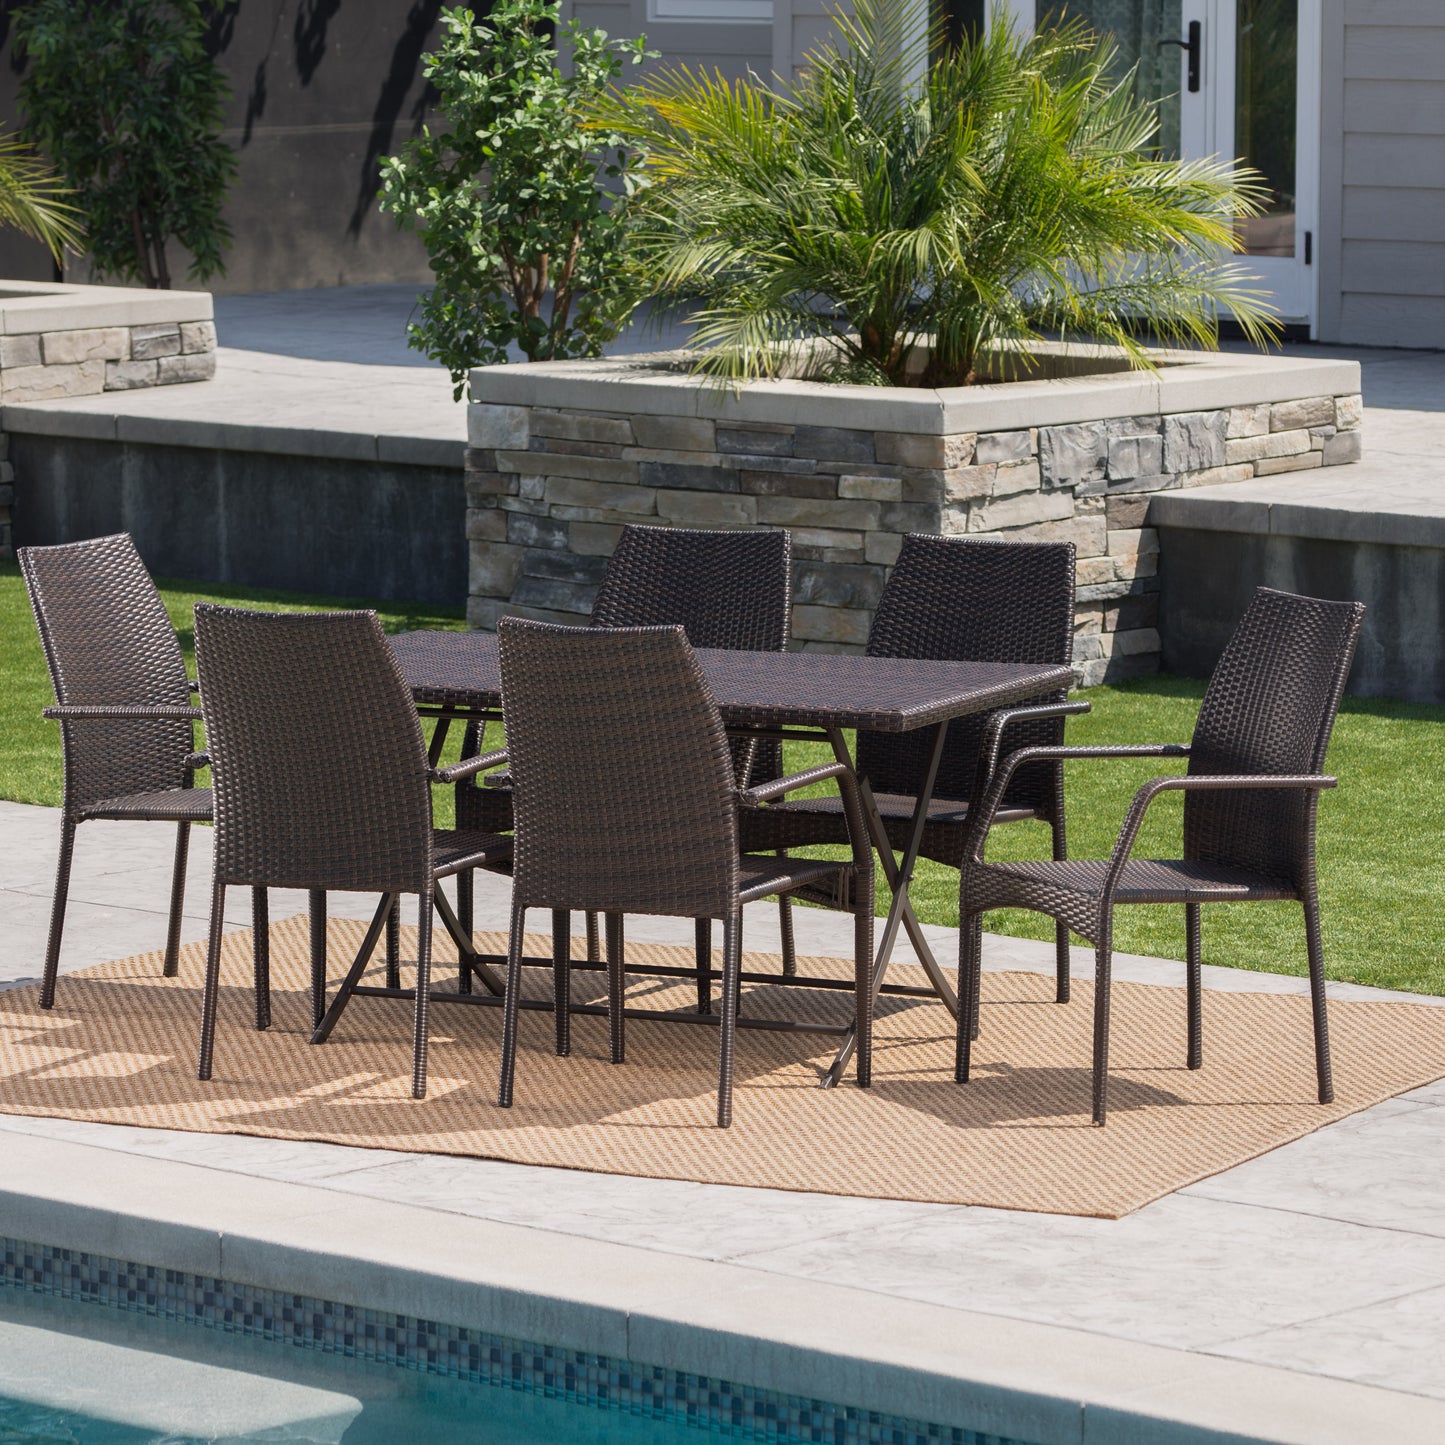 Arya Outdoor 7 Piece Multi-brown Wicker Dining Set with Foldable Table and Stack